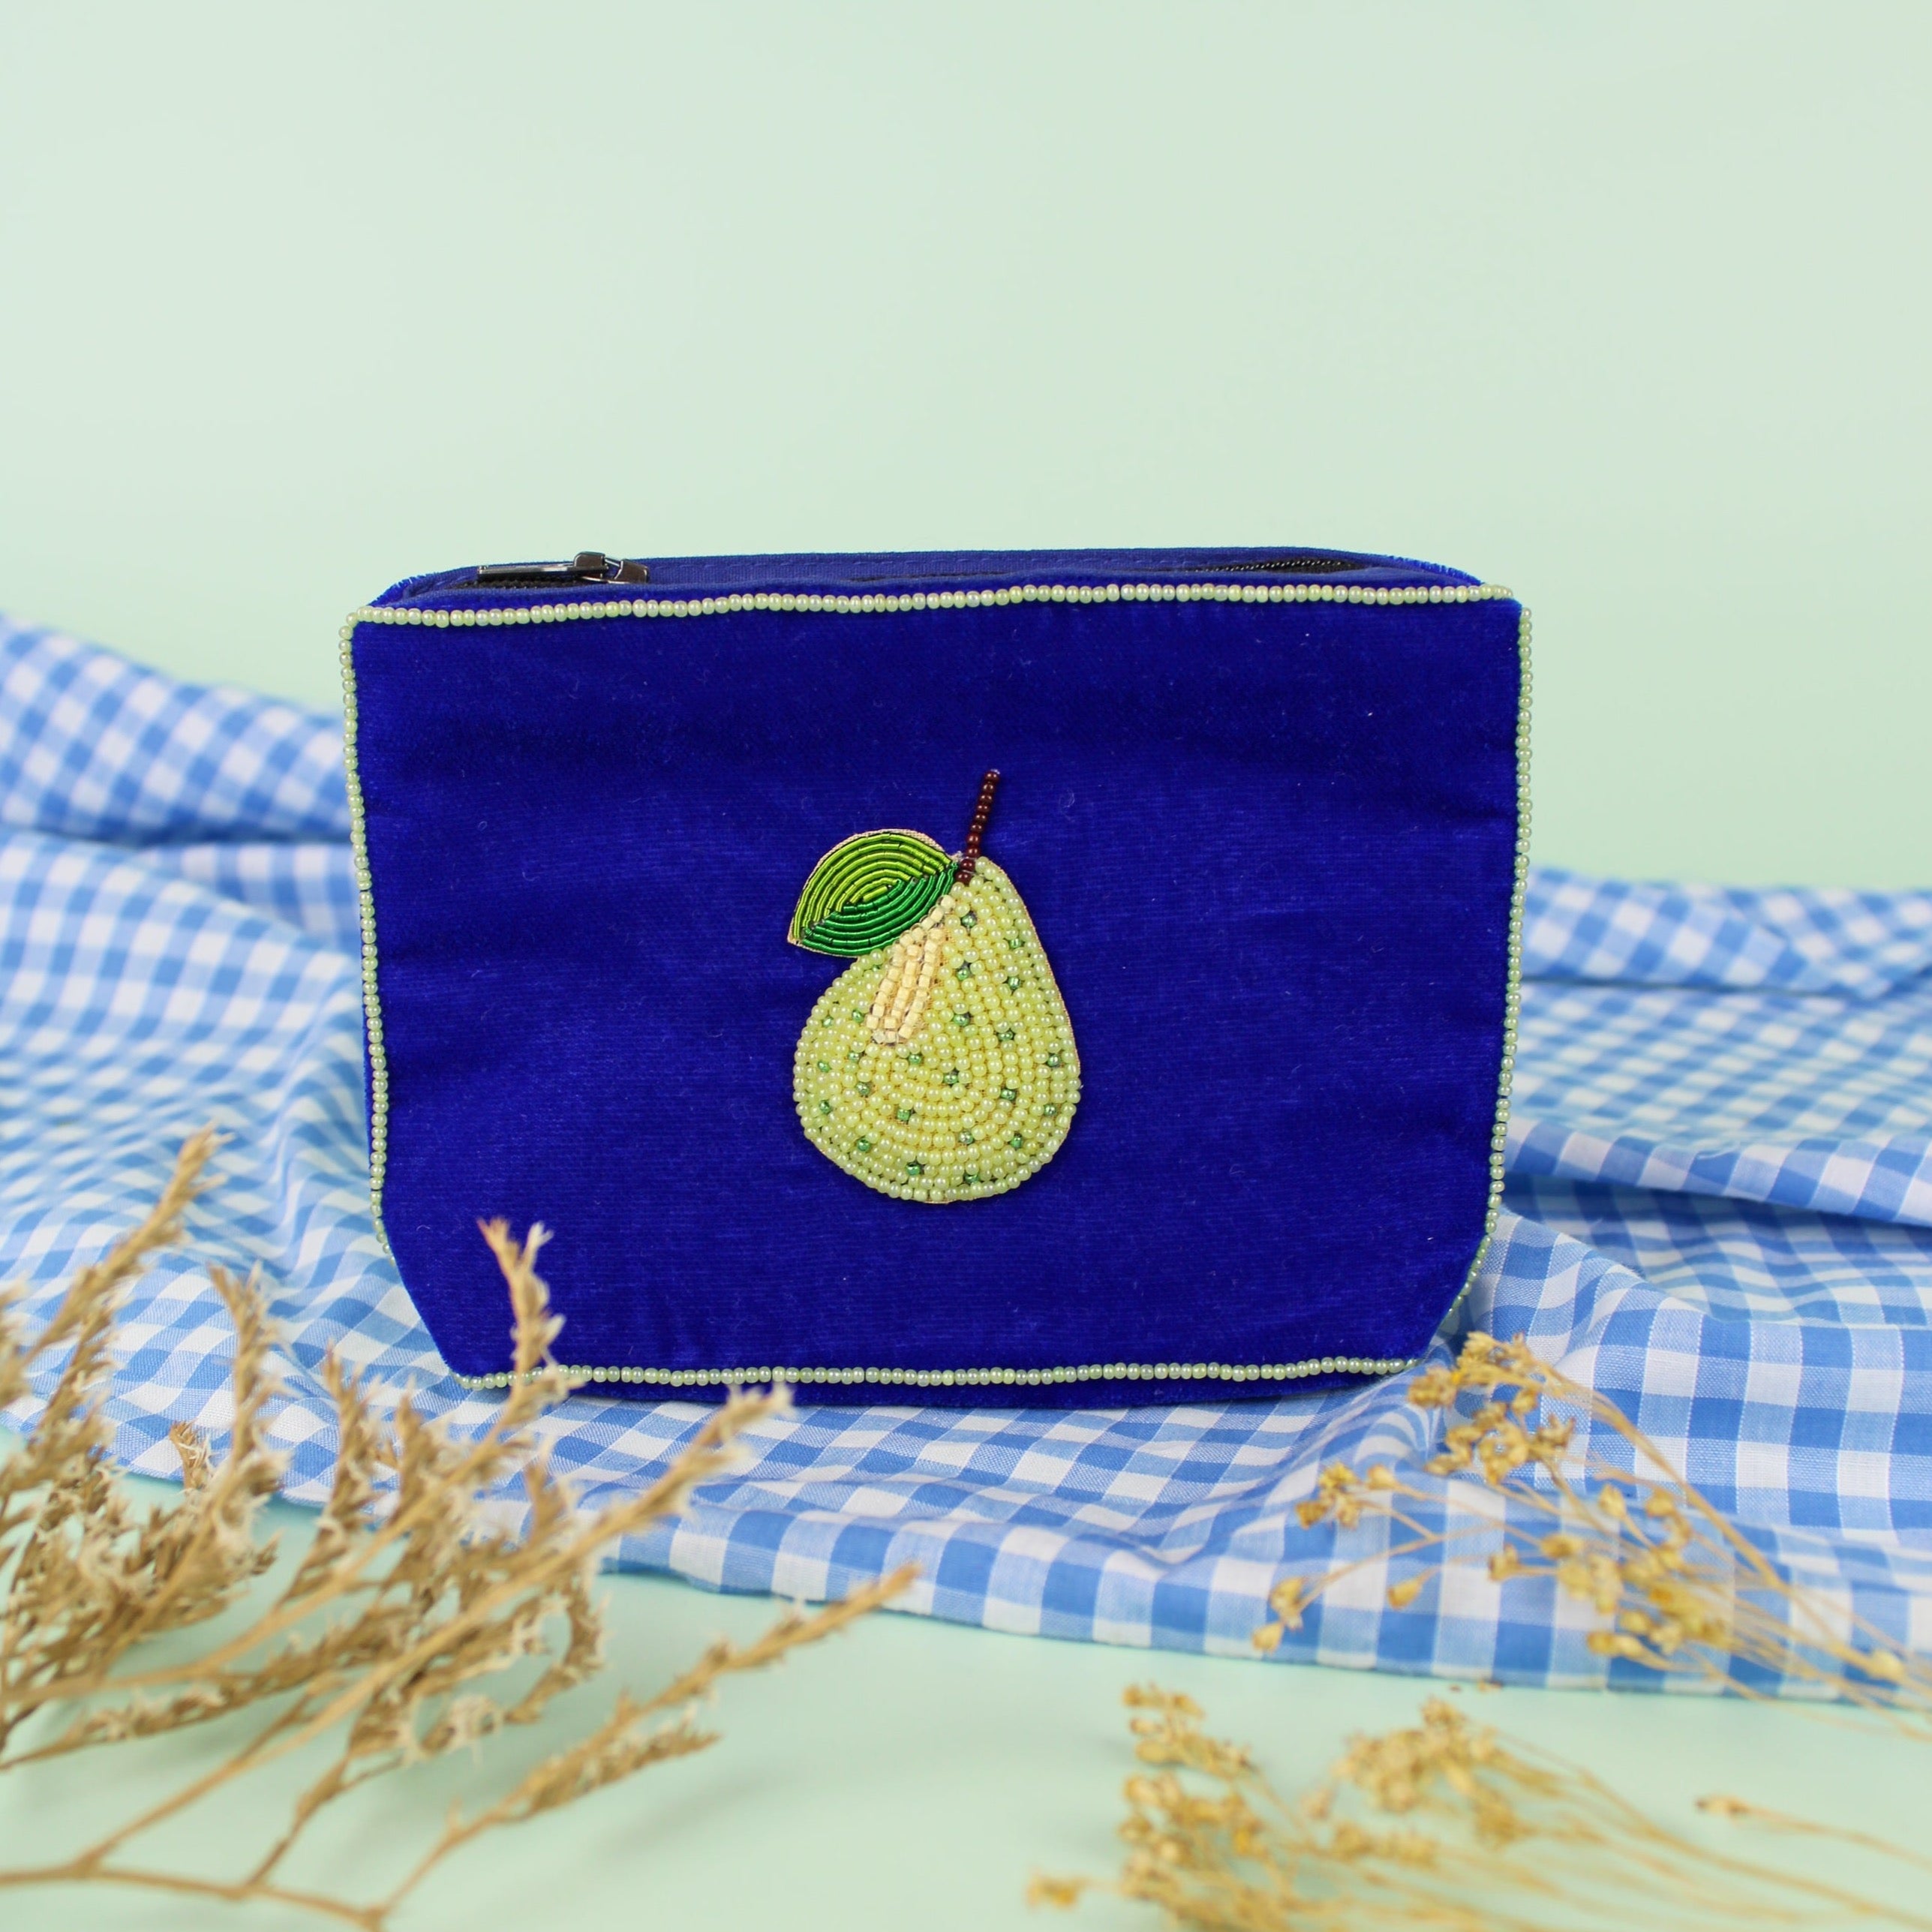 The Luxury Sapphire Velvet Hand-Beaded Purse with Pale Green Pear Design